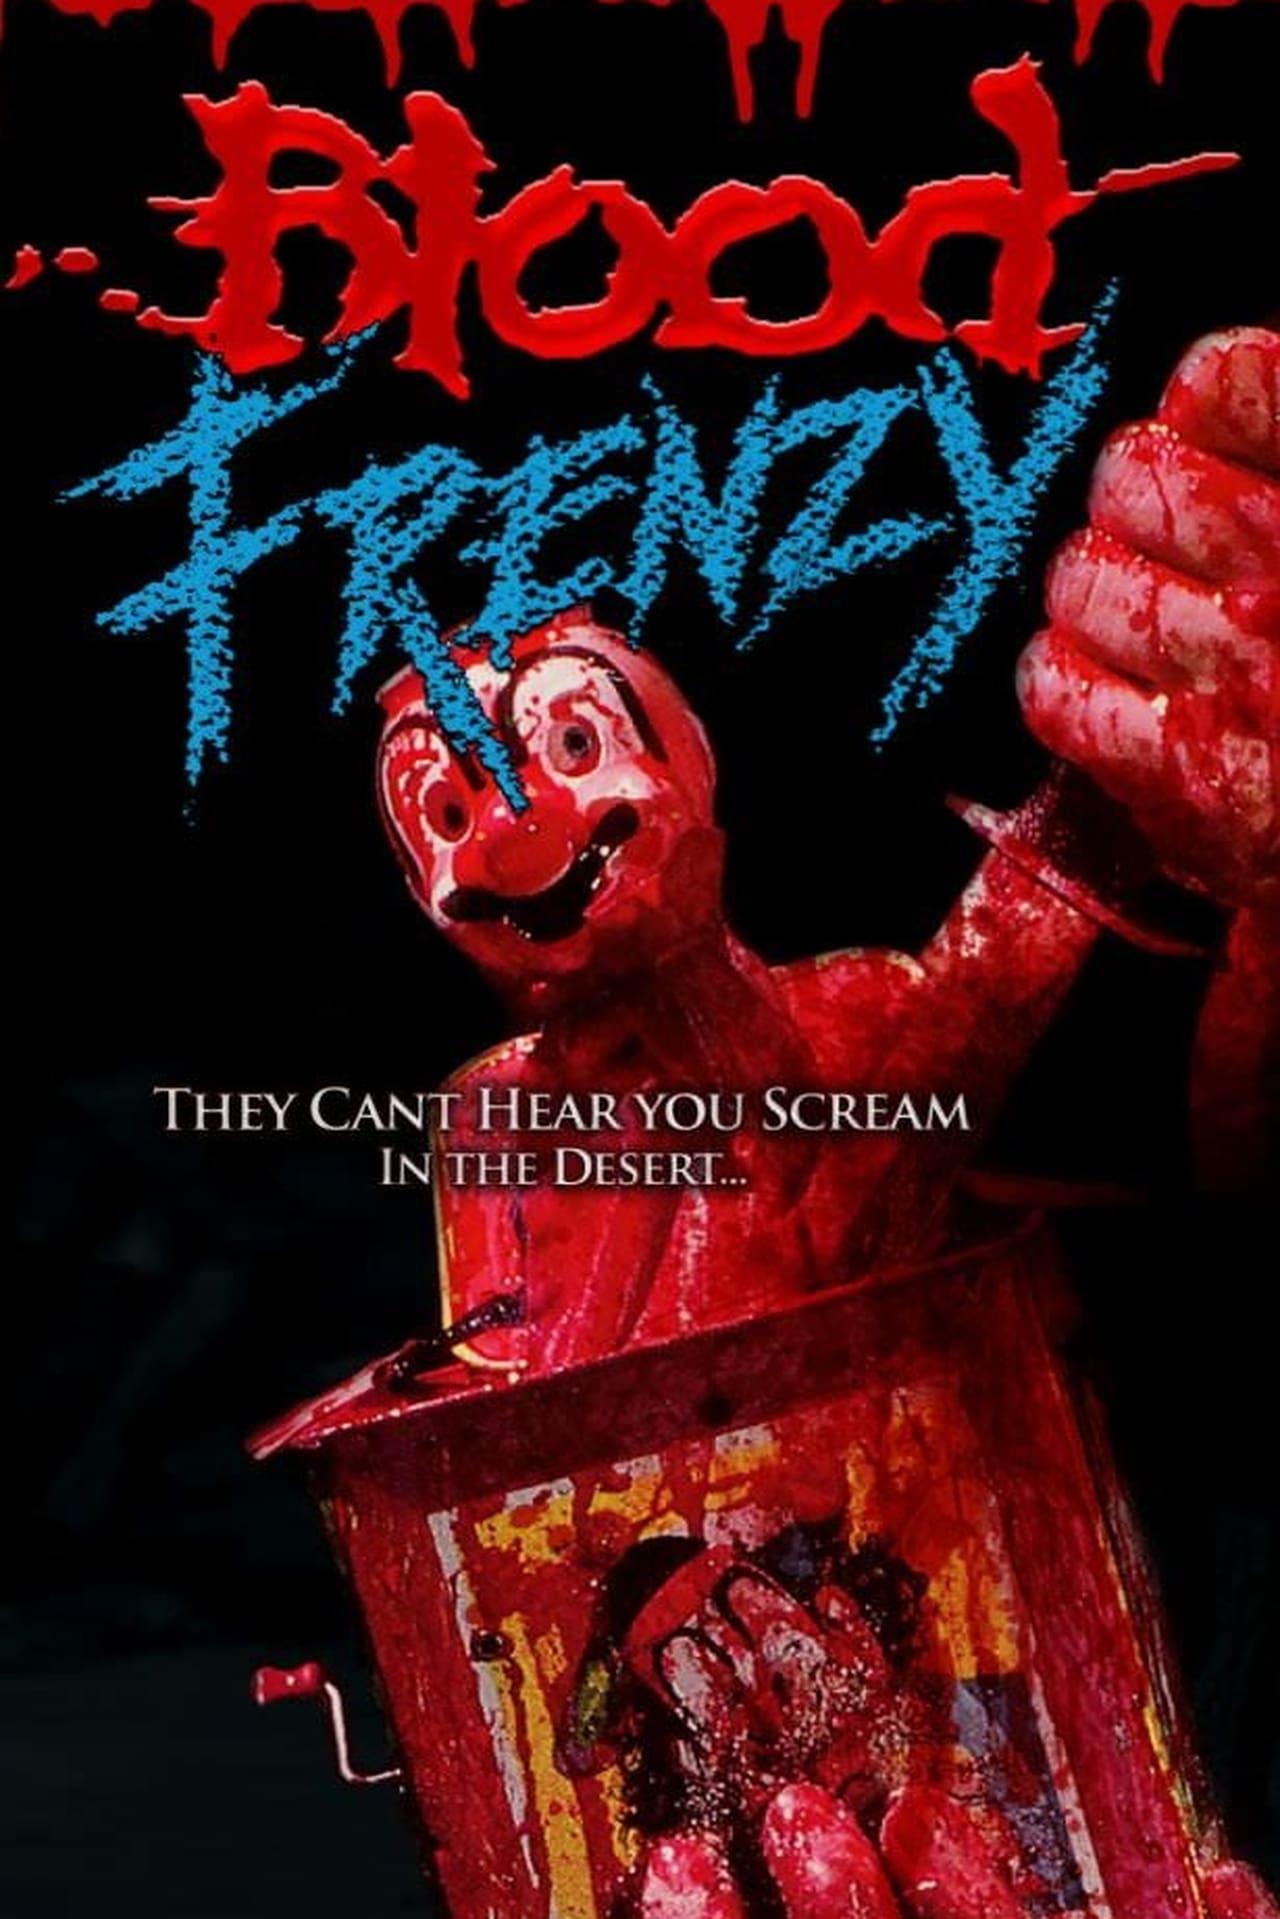 Blood Frenzy poster